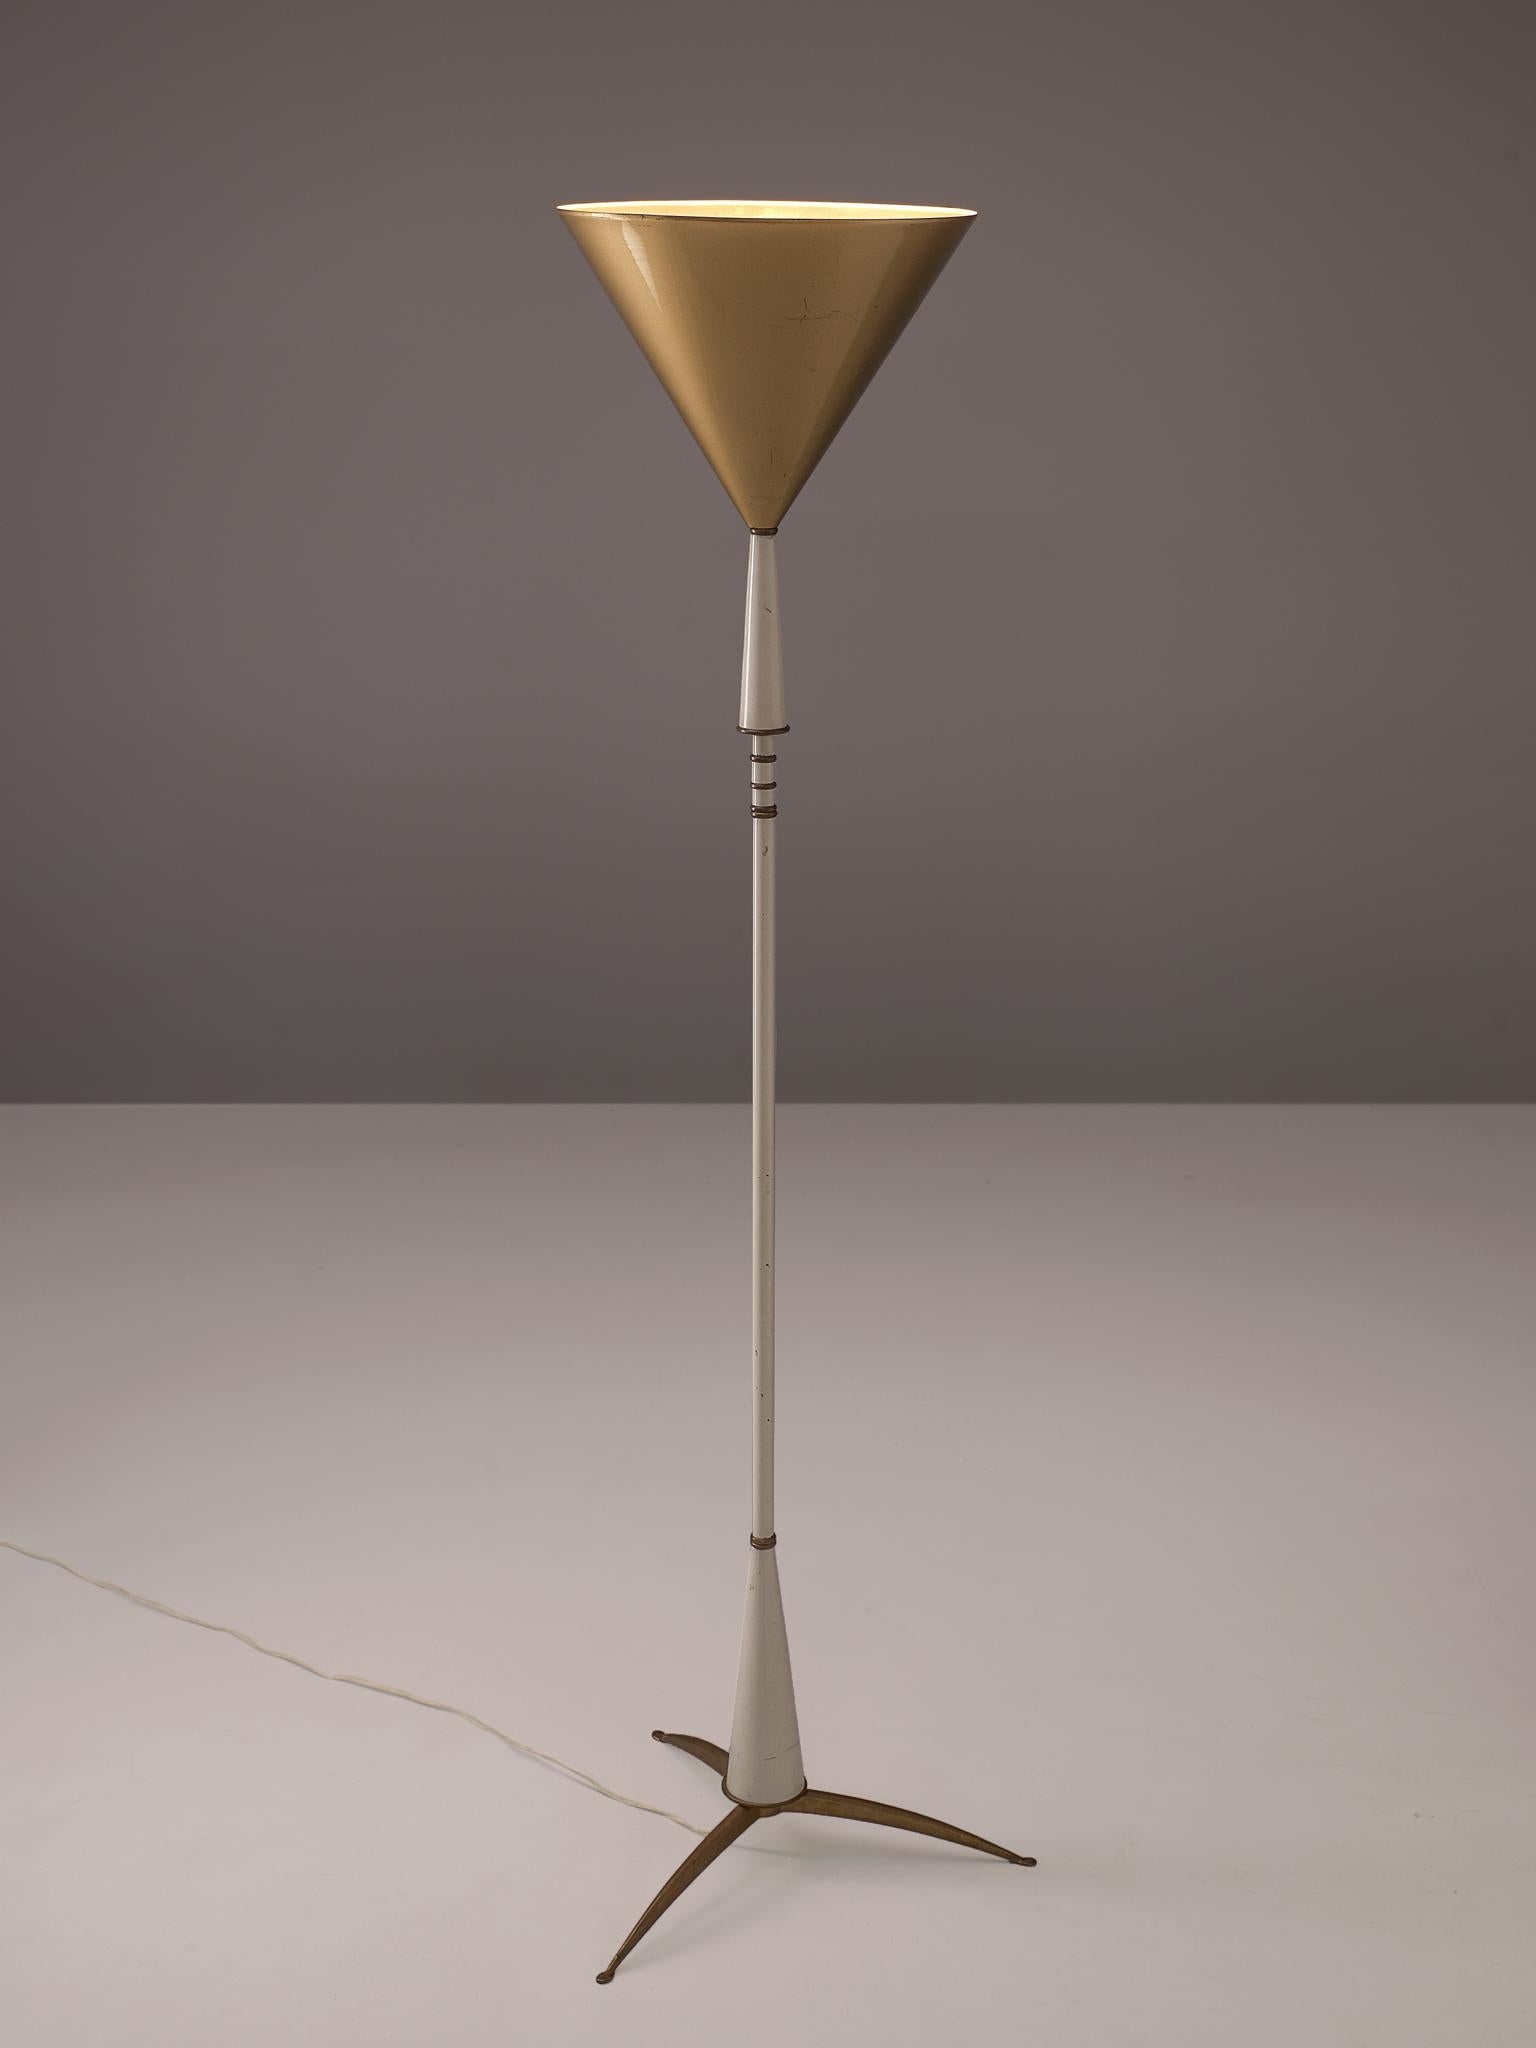 Floor lamp, metal and brass, Italy, 1960s.

Elegant floorlamp with tripod foot in brass. Consisting of a white lacquered metal base that is finished with brass rings. The base holds a large, cone shaped shade that has a golden color lacquer on the